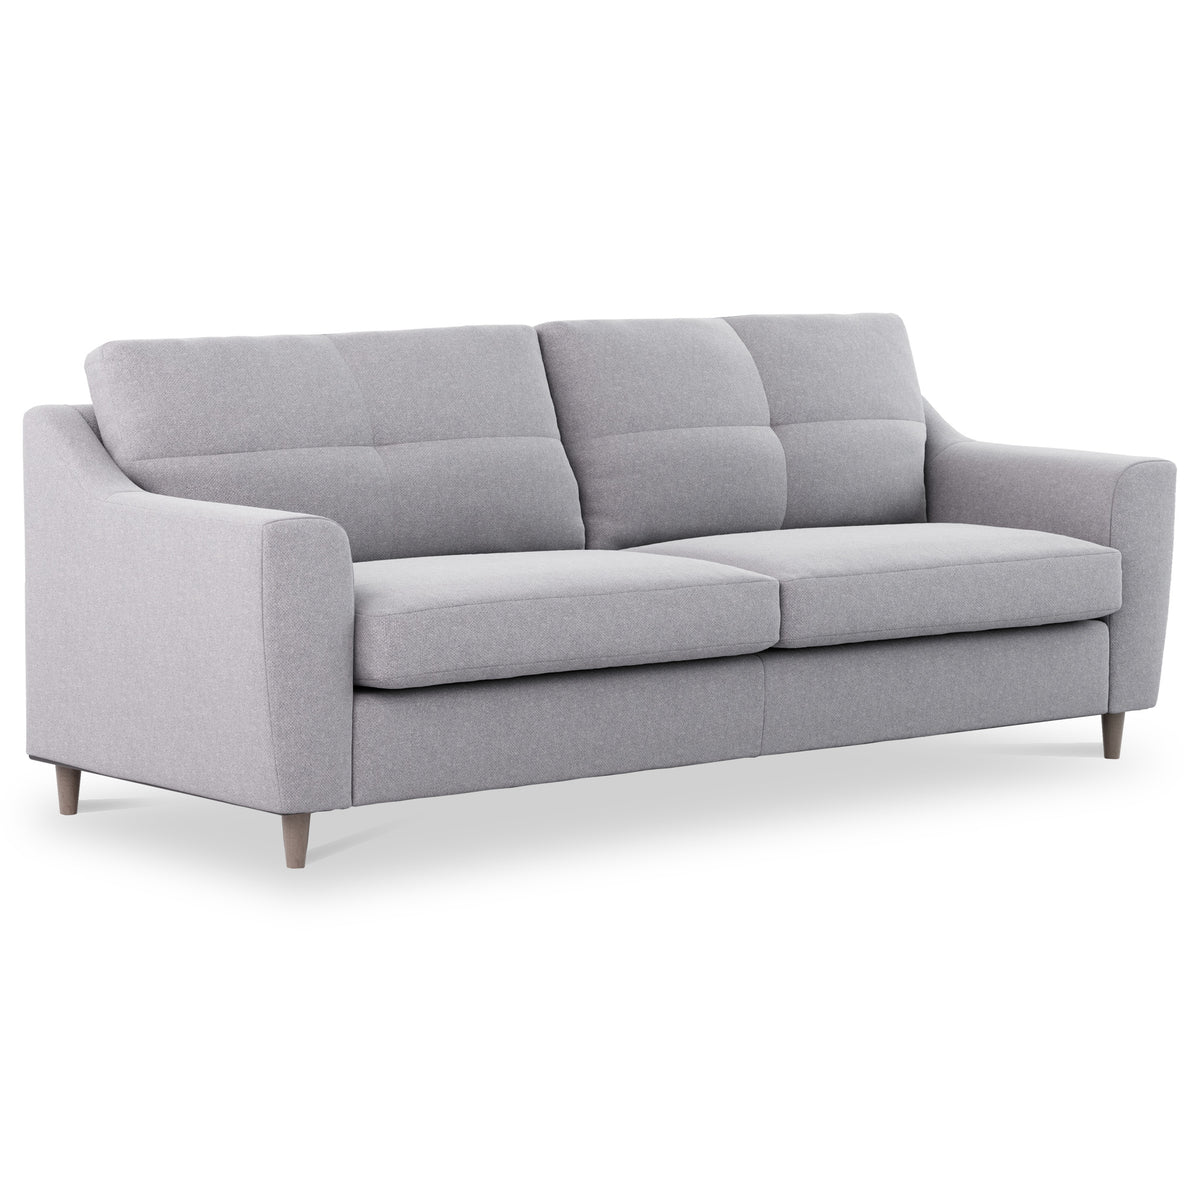 Justin Silver 4 Seater Sofa from Roseland Furniture 